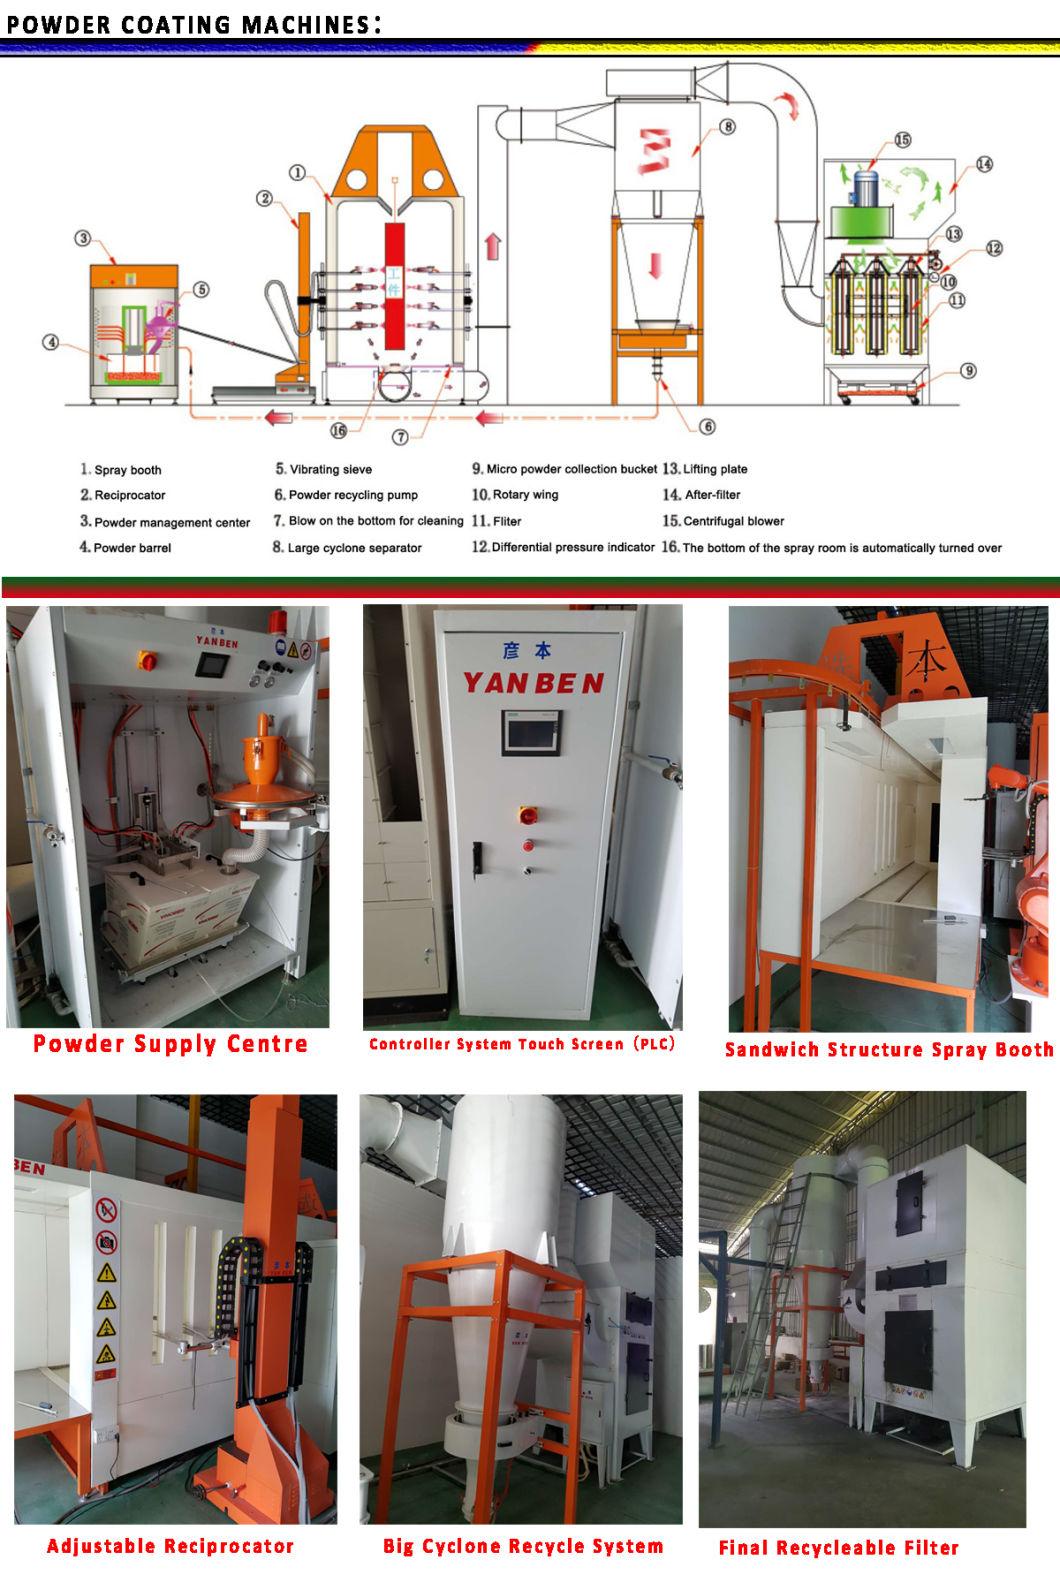 Highly Configurated and Economical Type Powder Coating Equipment with Adopted Plastic Thermosetting Type Powder Paint Latest Technology